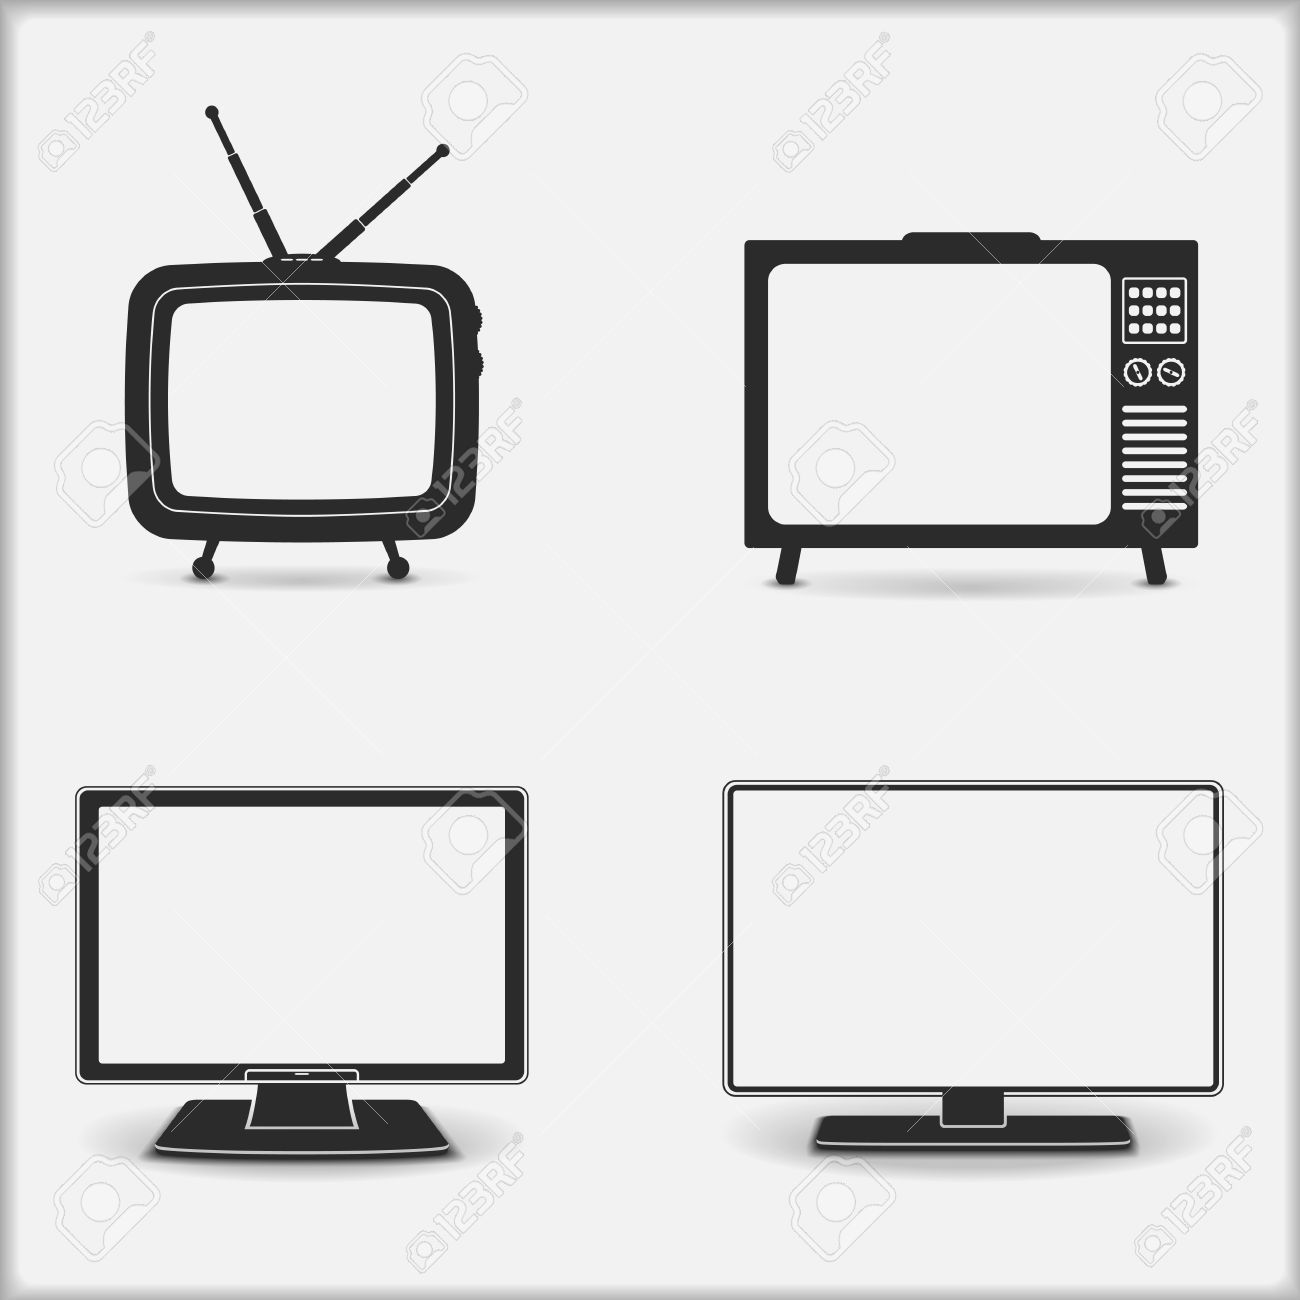 Tv clipart vector free